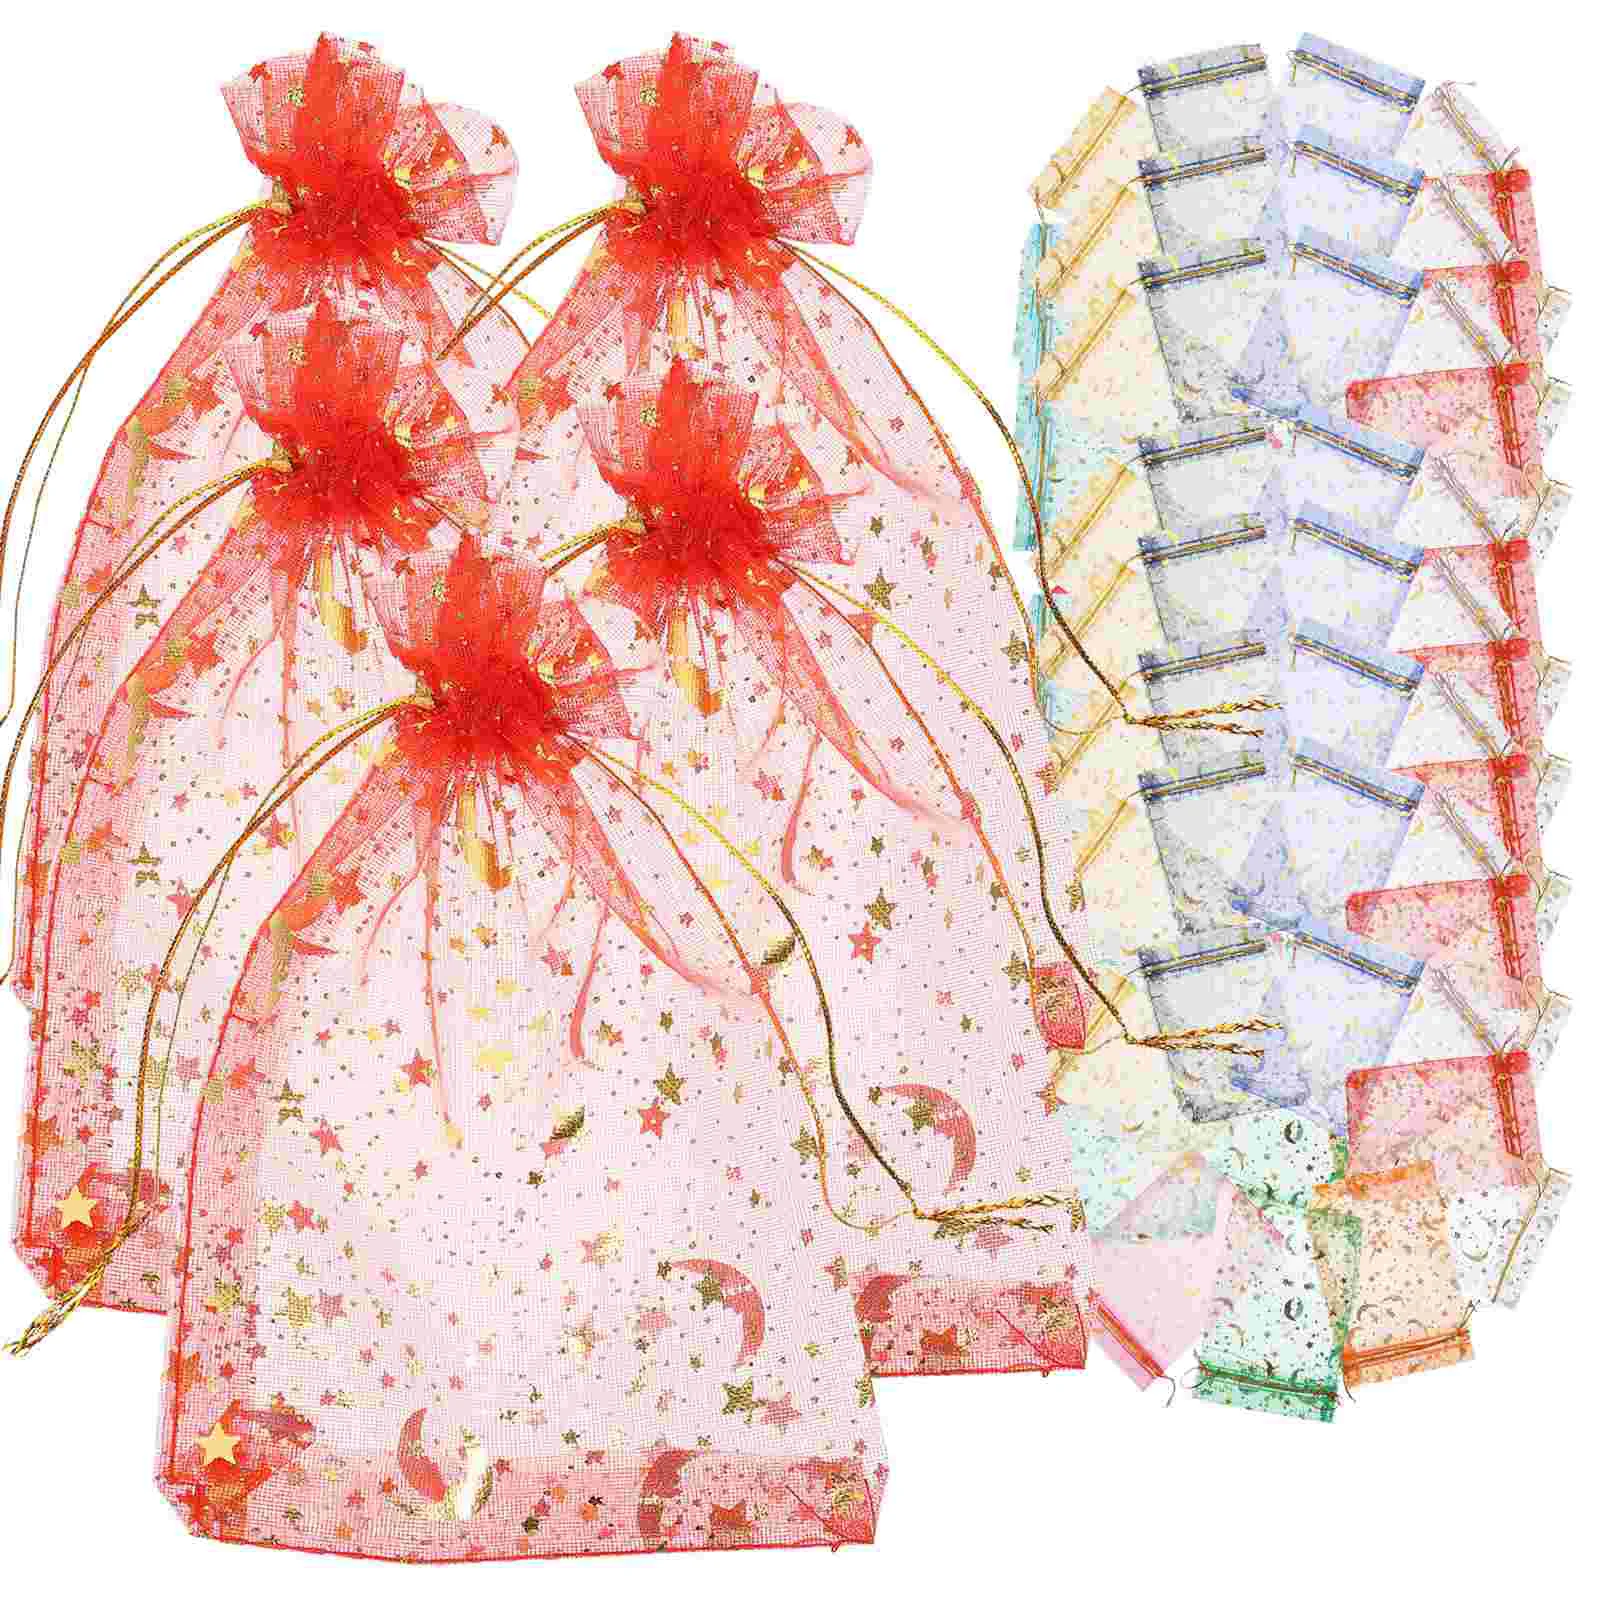 

Bags Drawstring Candy Gift Organza Bag Jewelry Pouch Pouches Party Wedding Favor Mesh Small Storage Net Favors Goodies Jewellery